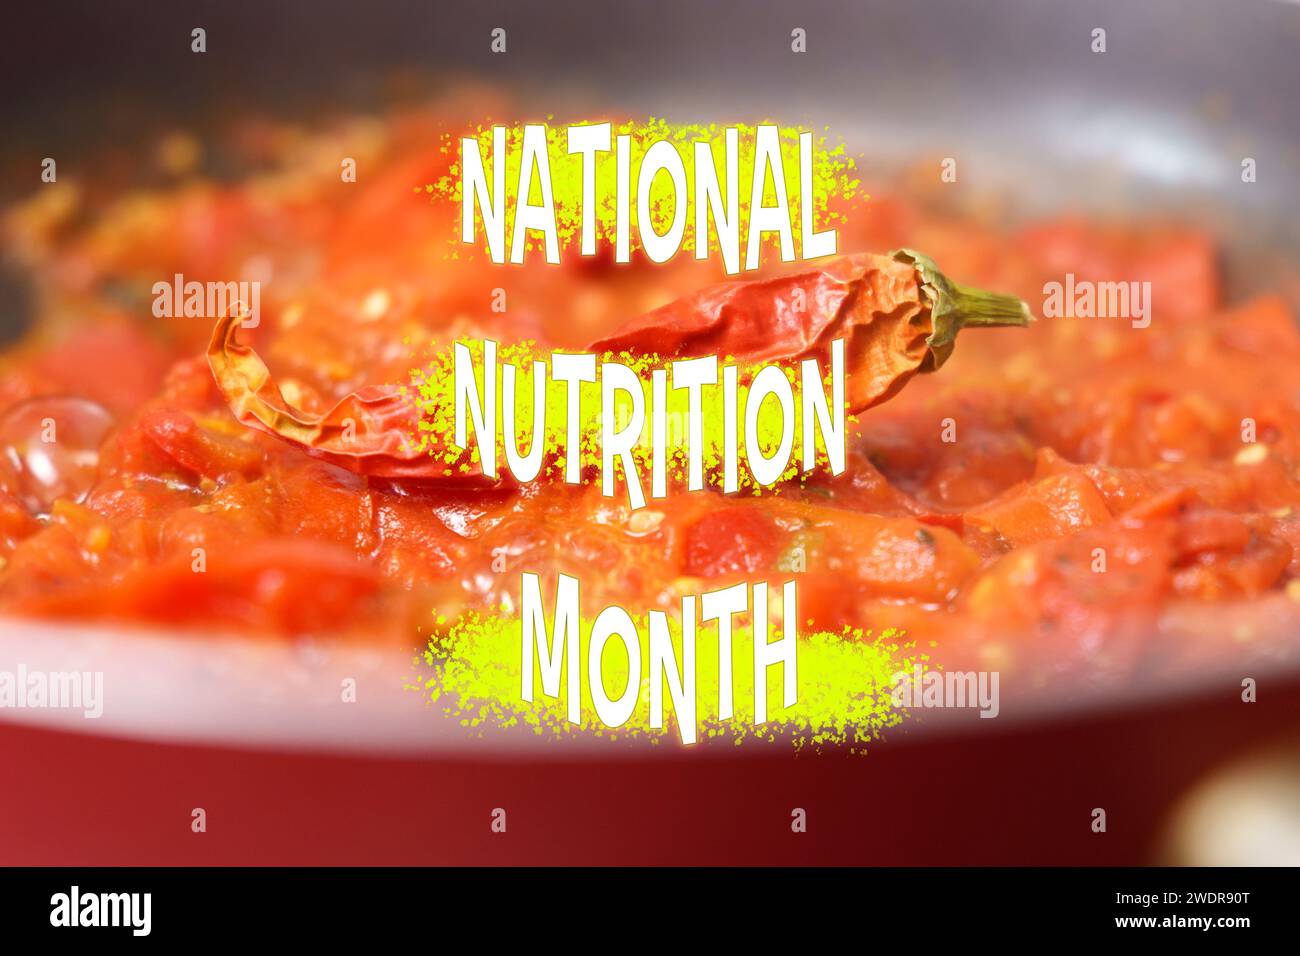 Celebrating National Nutrition Month With Vibrant Tomato-Based Dish in Focus Stock Photo